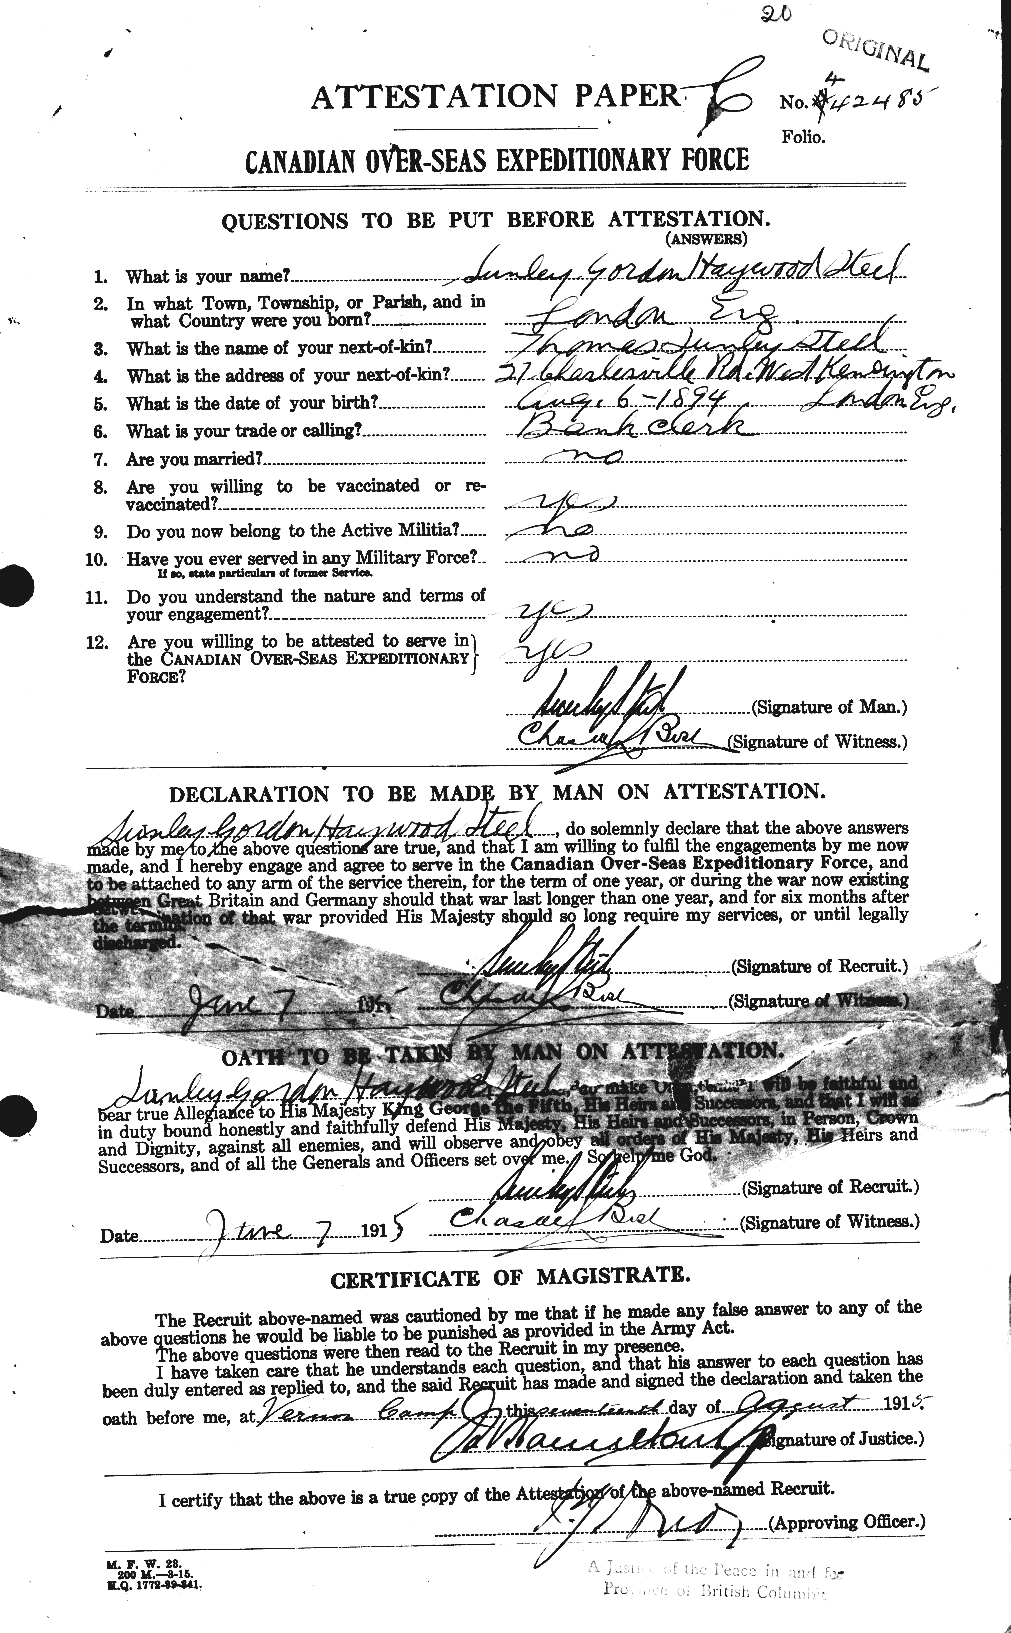 Personnel Records of the First World War - CEF 116275a